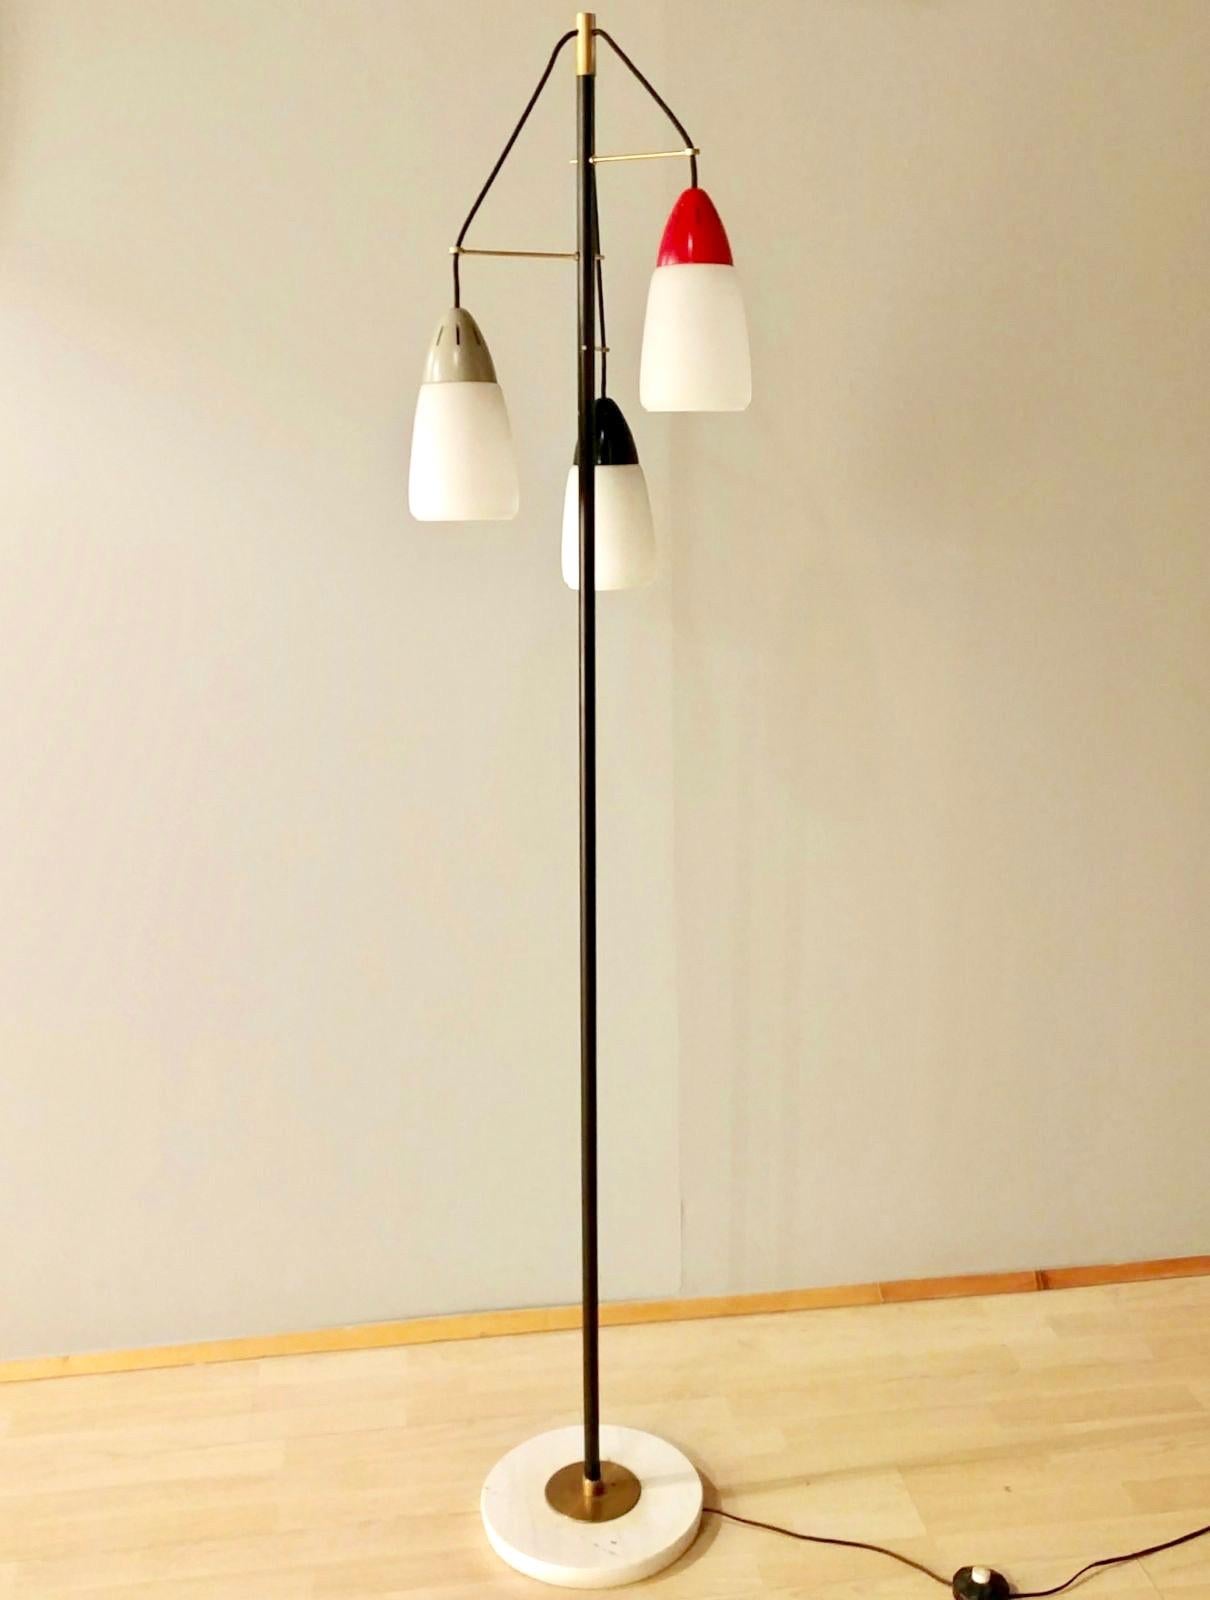 Italian floor lamp attributed to Stilnovo, 1956
Lamps features three lights, solid brass hardware that has been polished and sealed, opaline glass shades, marble base.